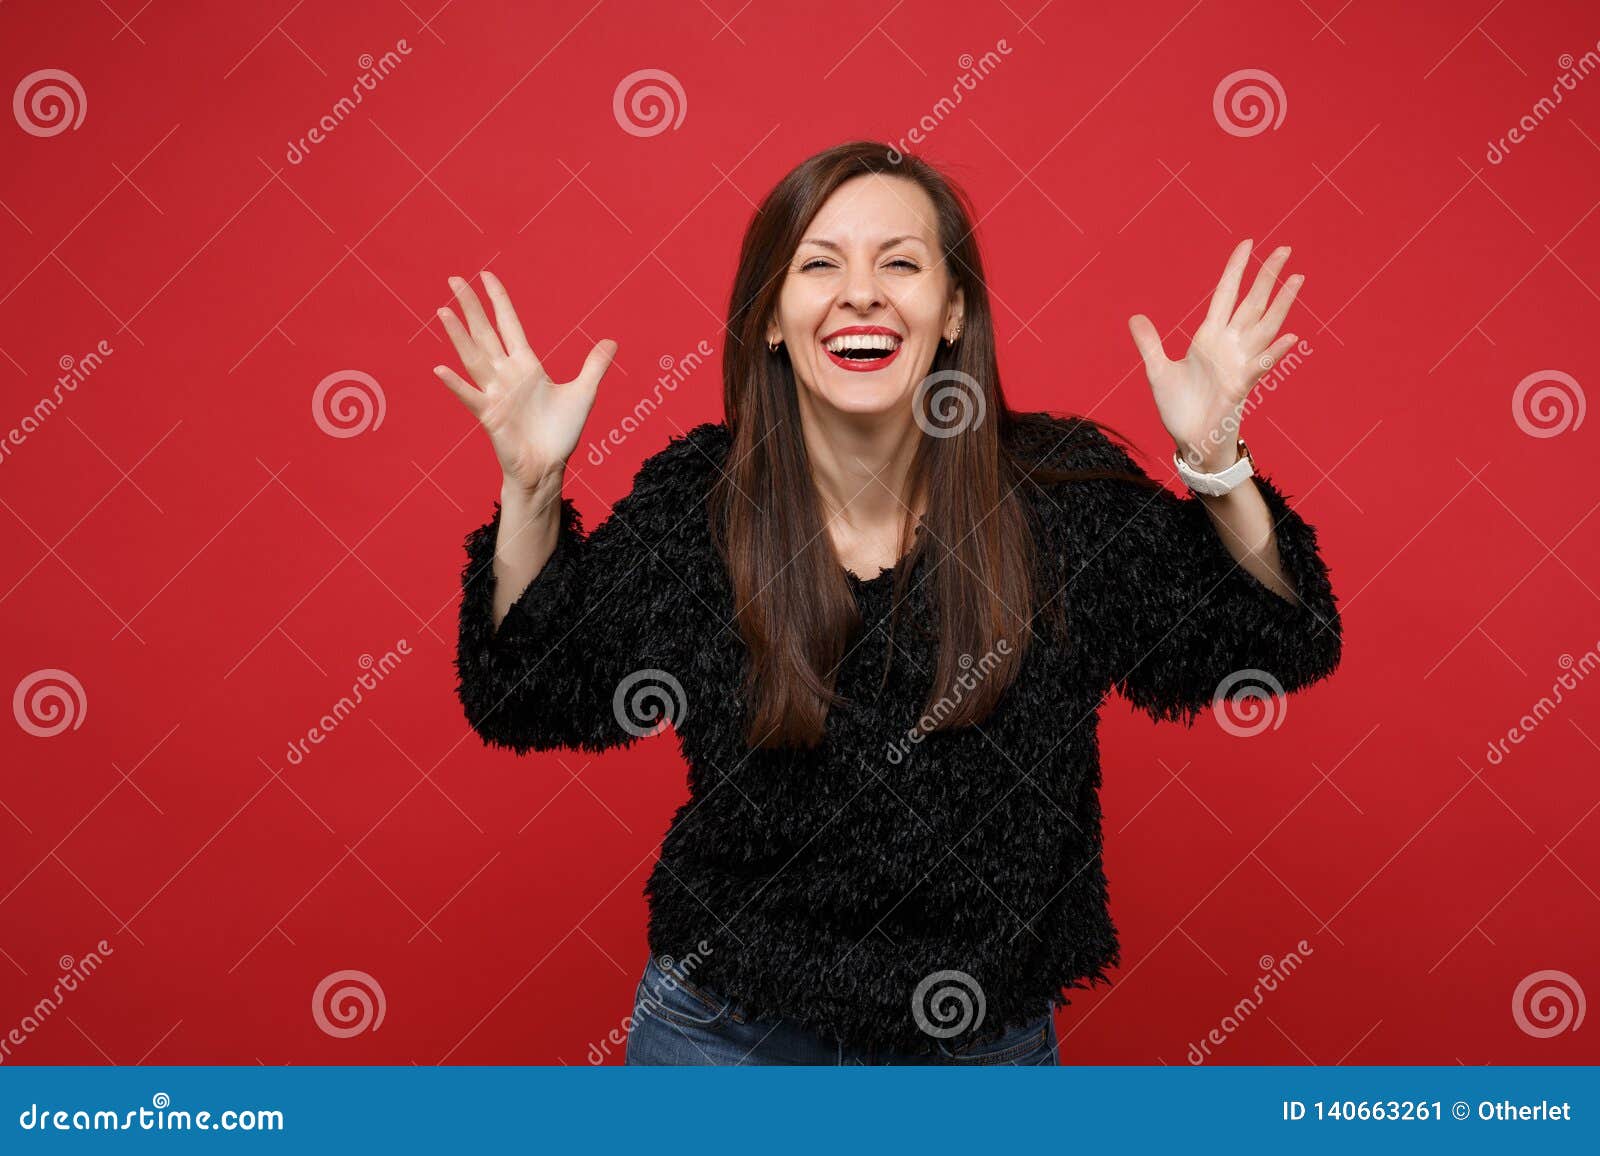 Cheerful Smiling Young Woman In Black Fur Sweater Standing And